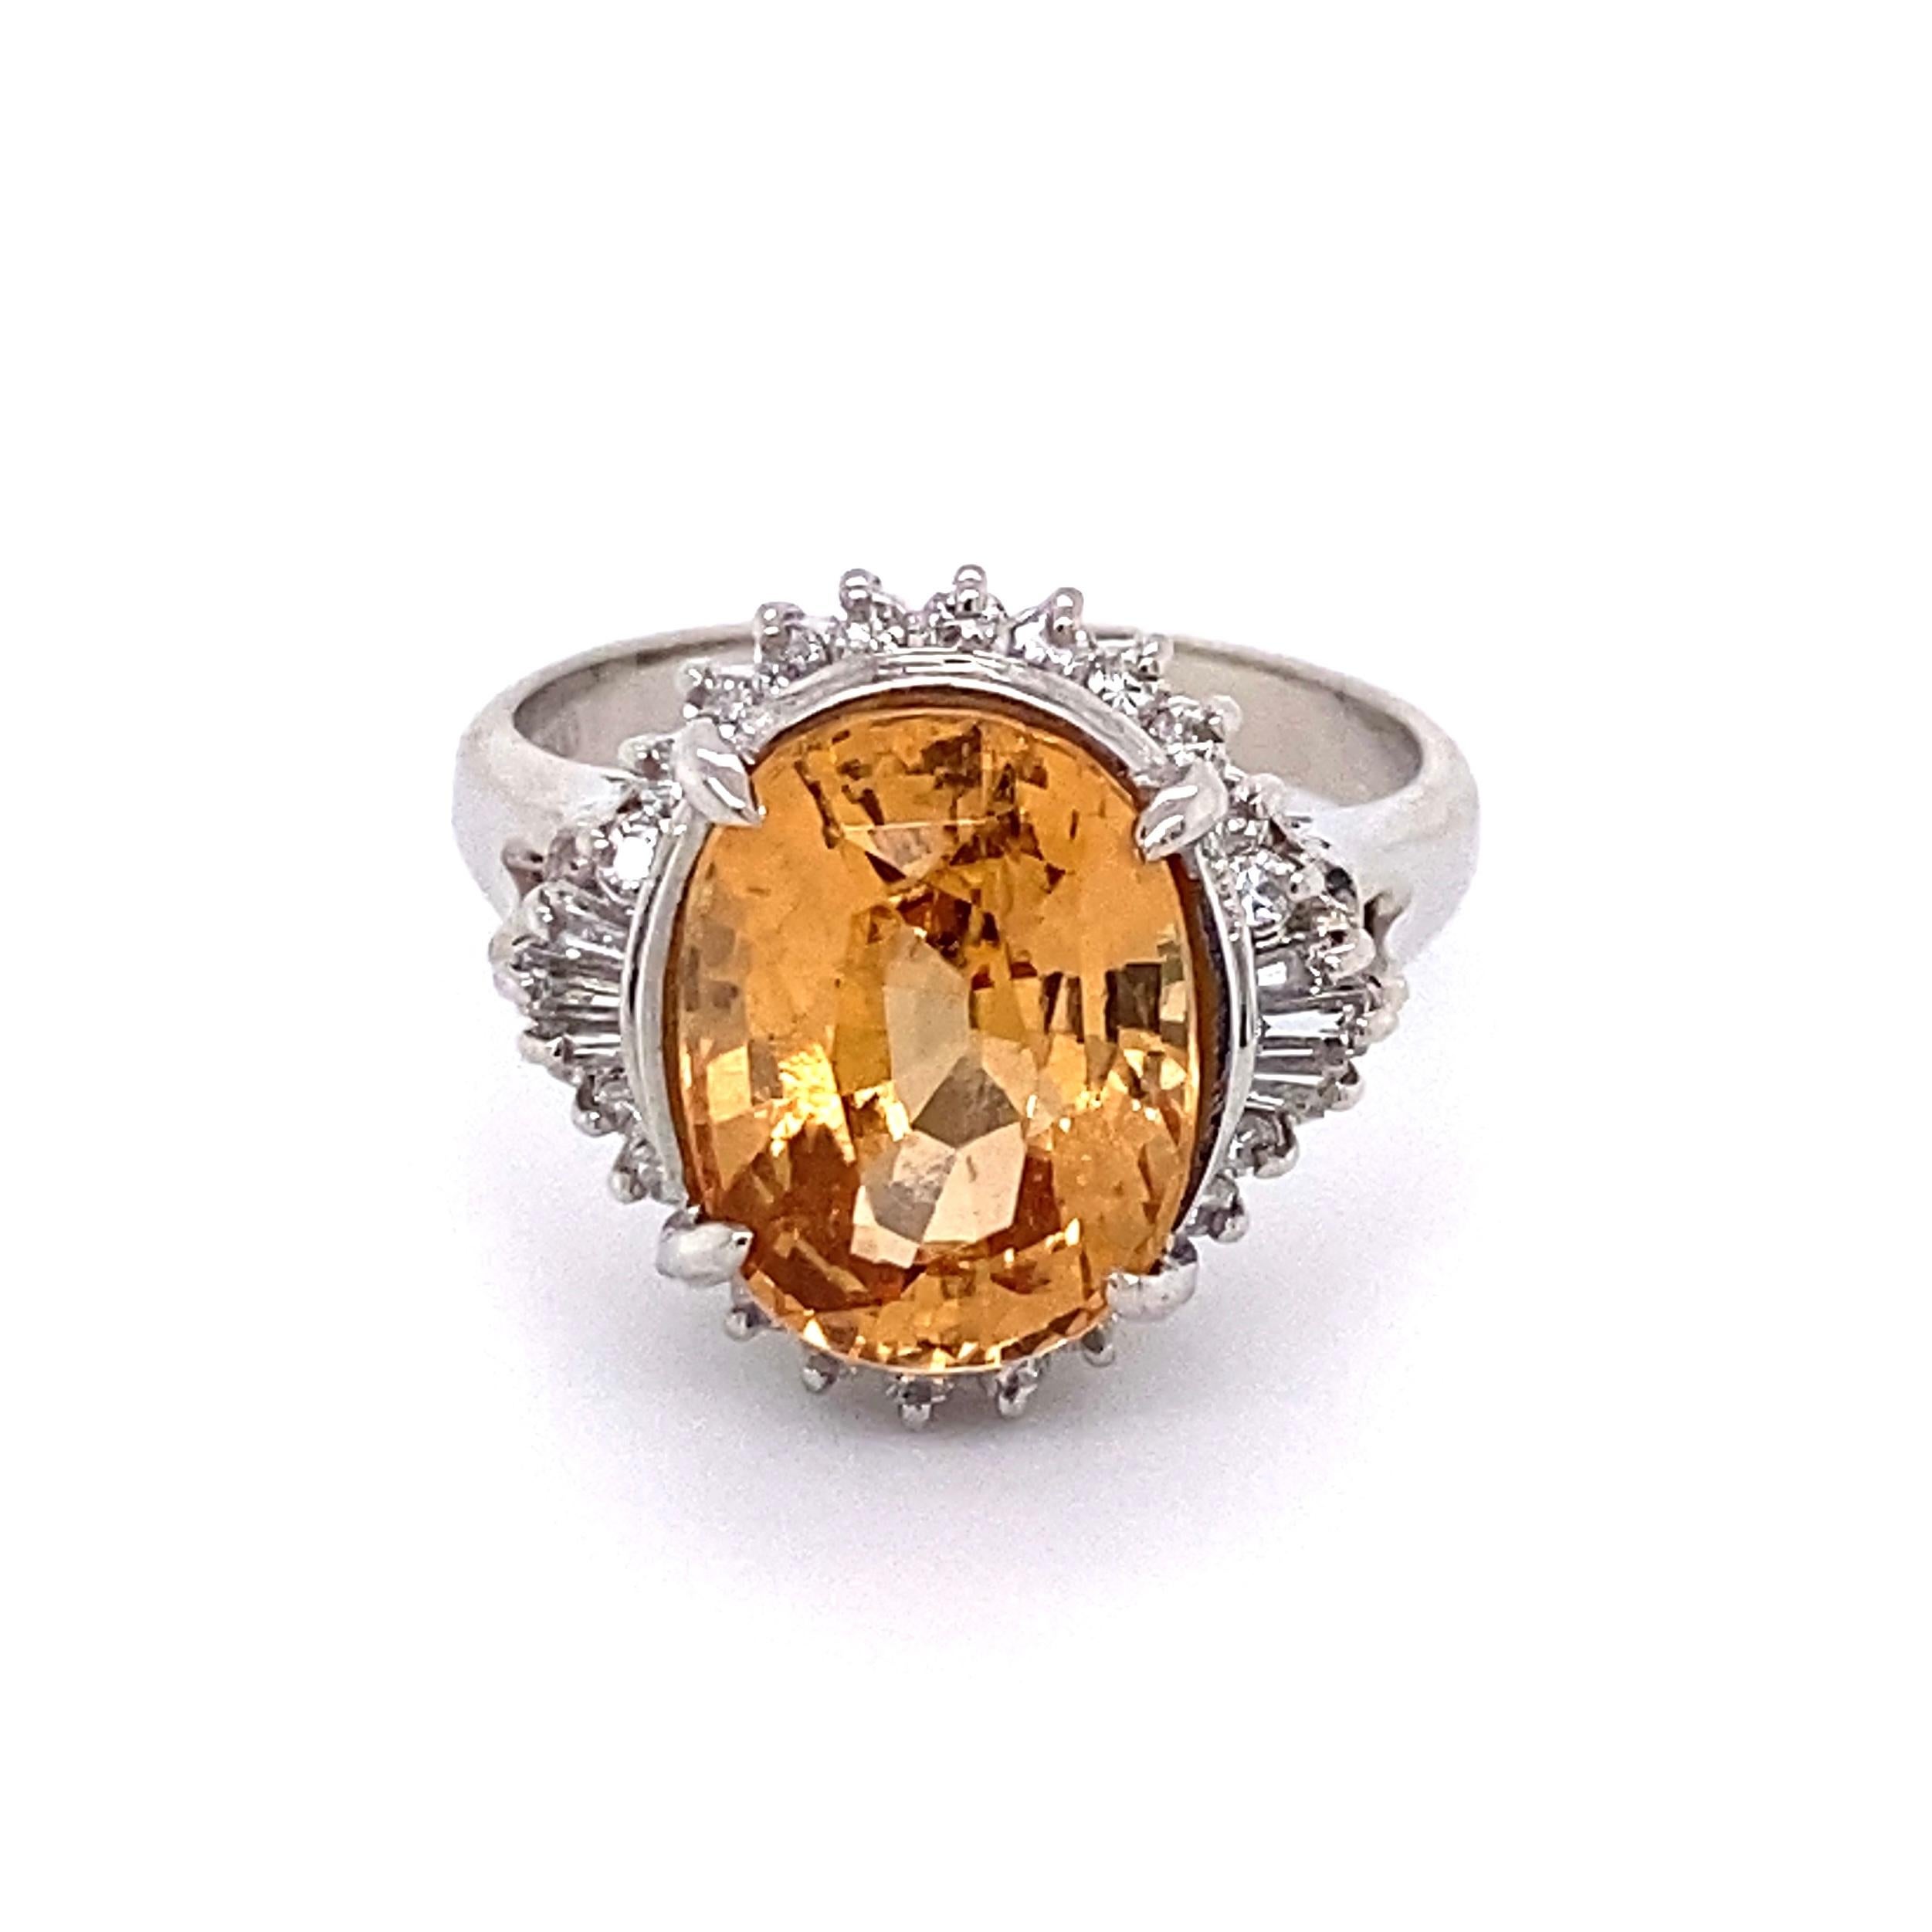 Oval Cut 4.93 Carat Oval Imperial Topaz and Diamond Platinum Ring Estate Fine Jewelry For Sale